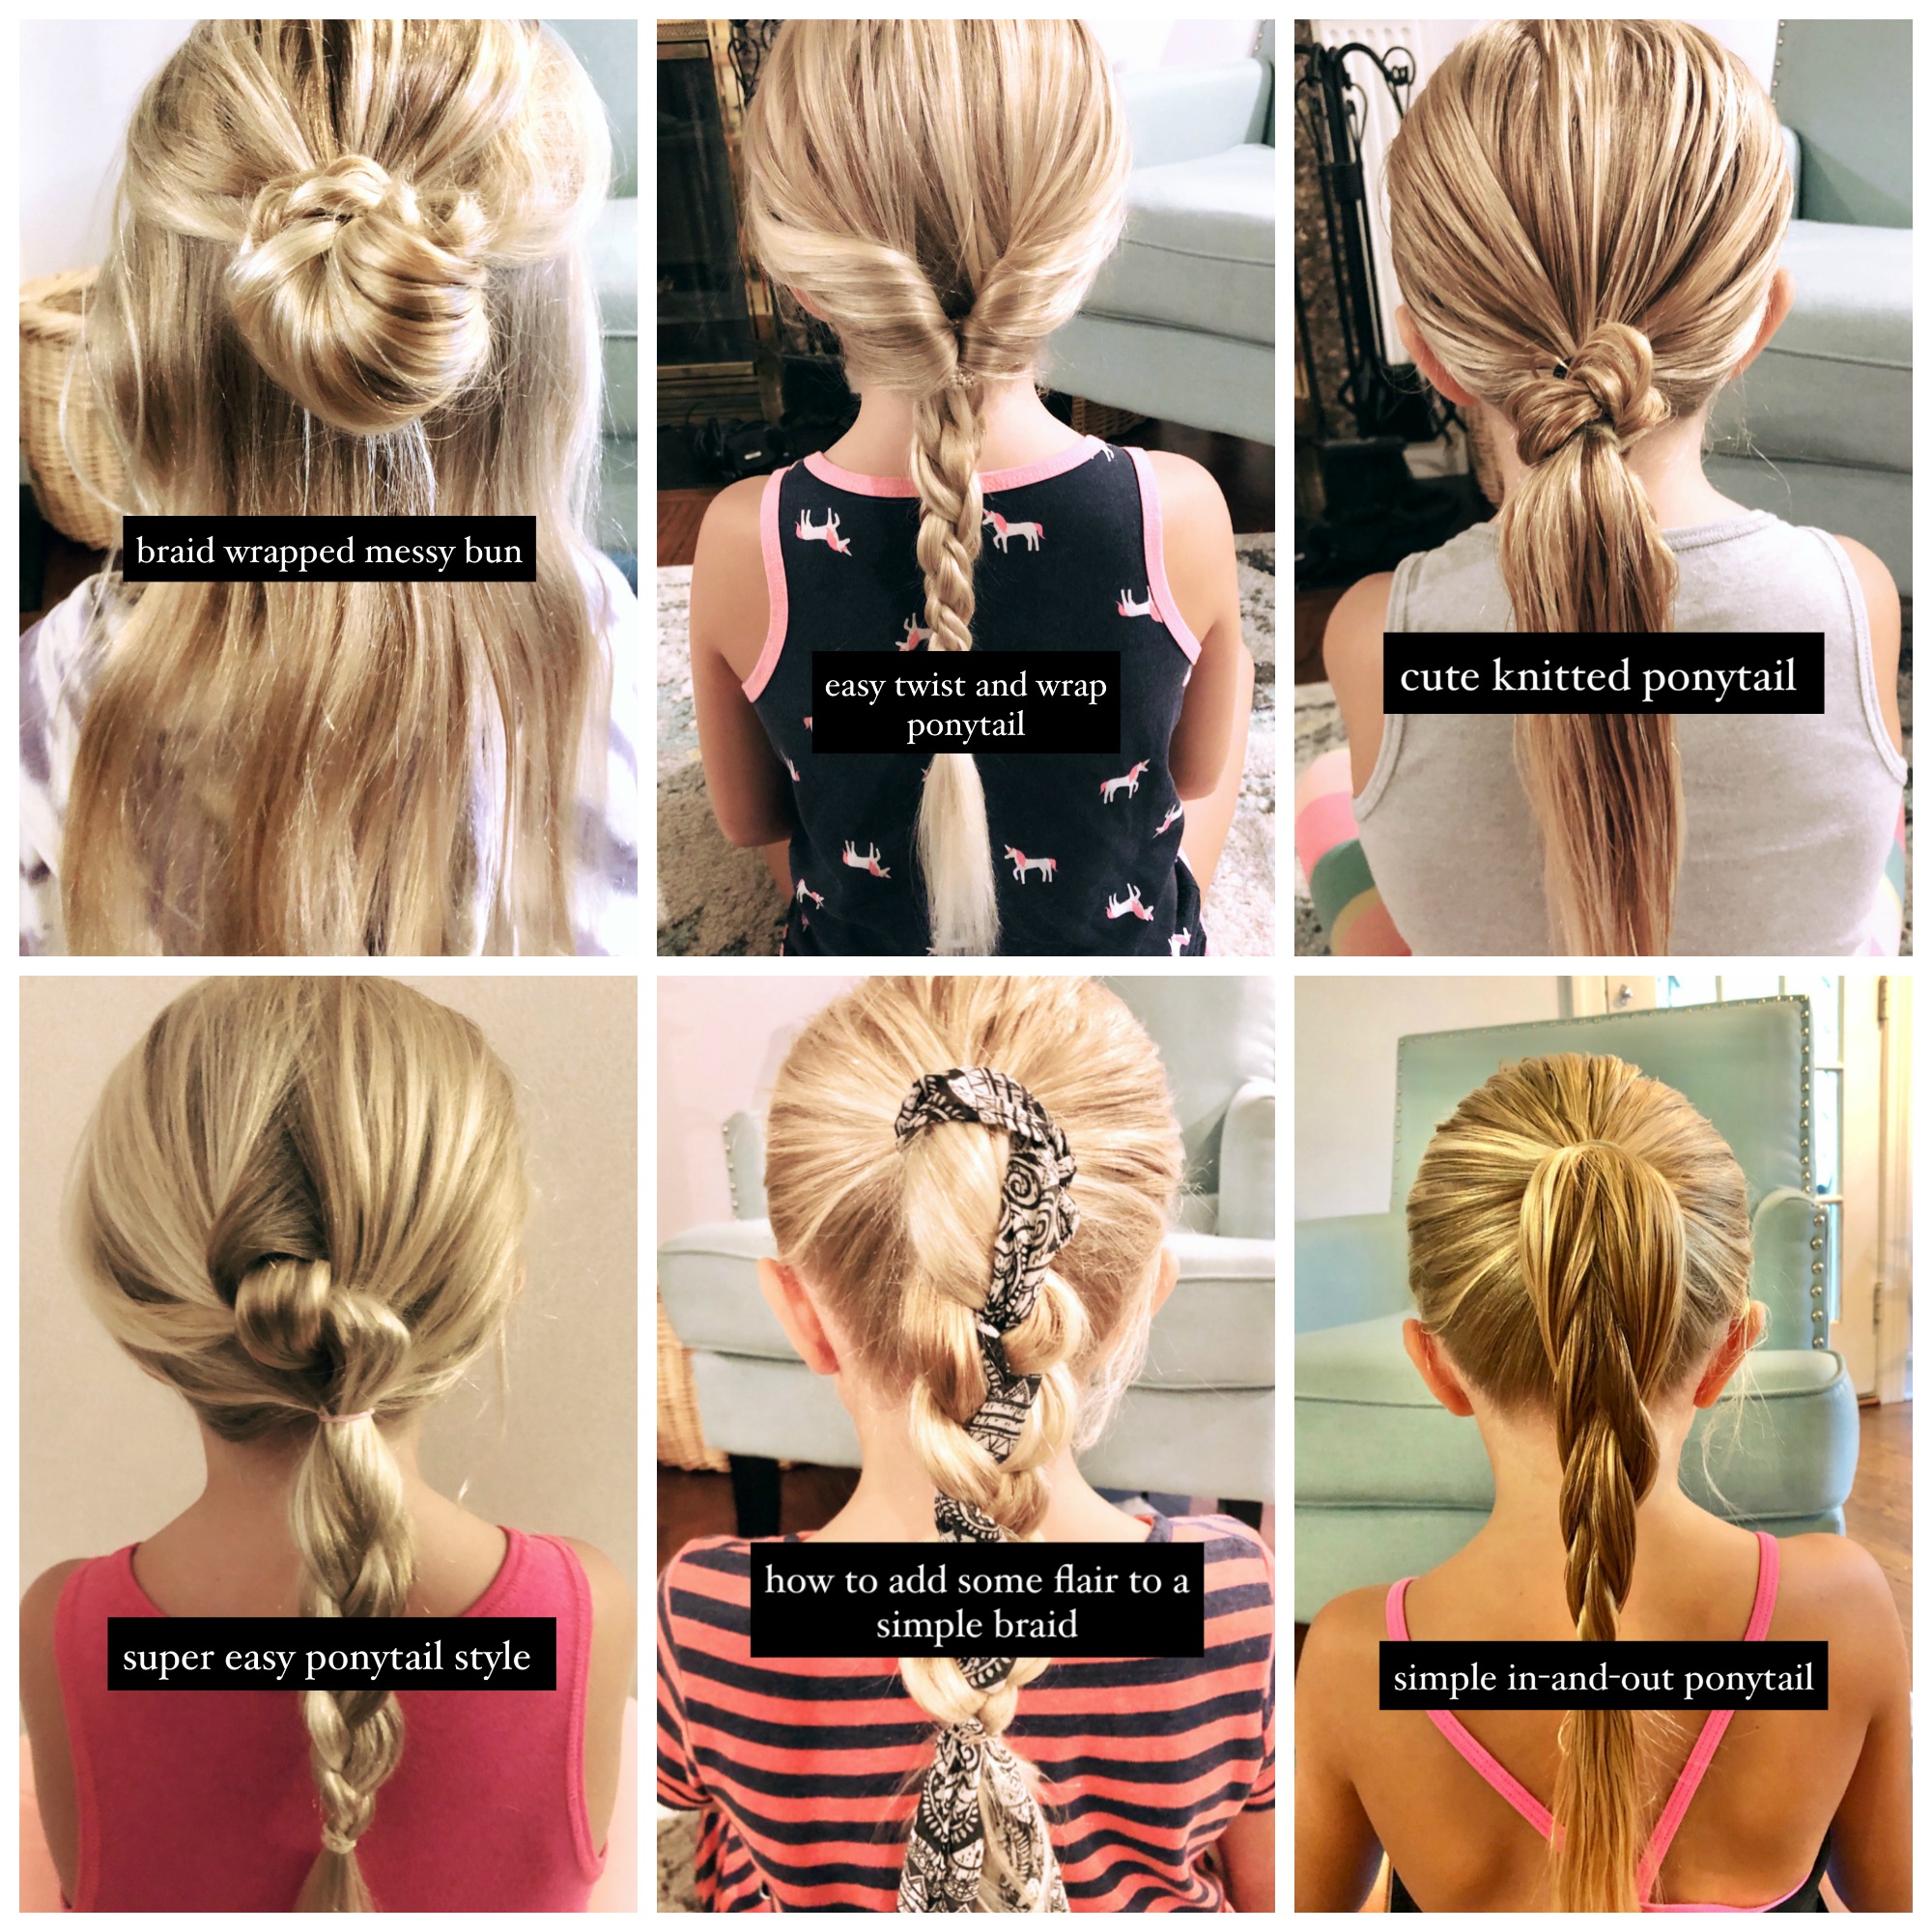 23 Simple Hairstyles for Thin Hair - How to Make Hair Look Thicker  @MyBeautyNaturally